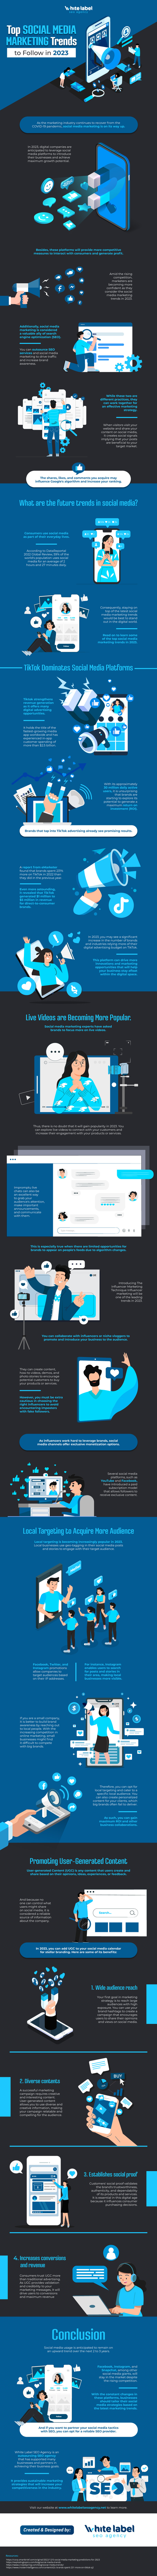 Top Social Media Marketing Trends to Follow in 2023 Infographic